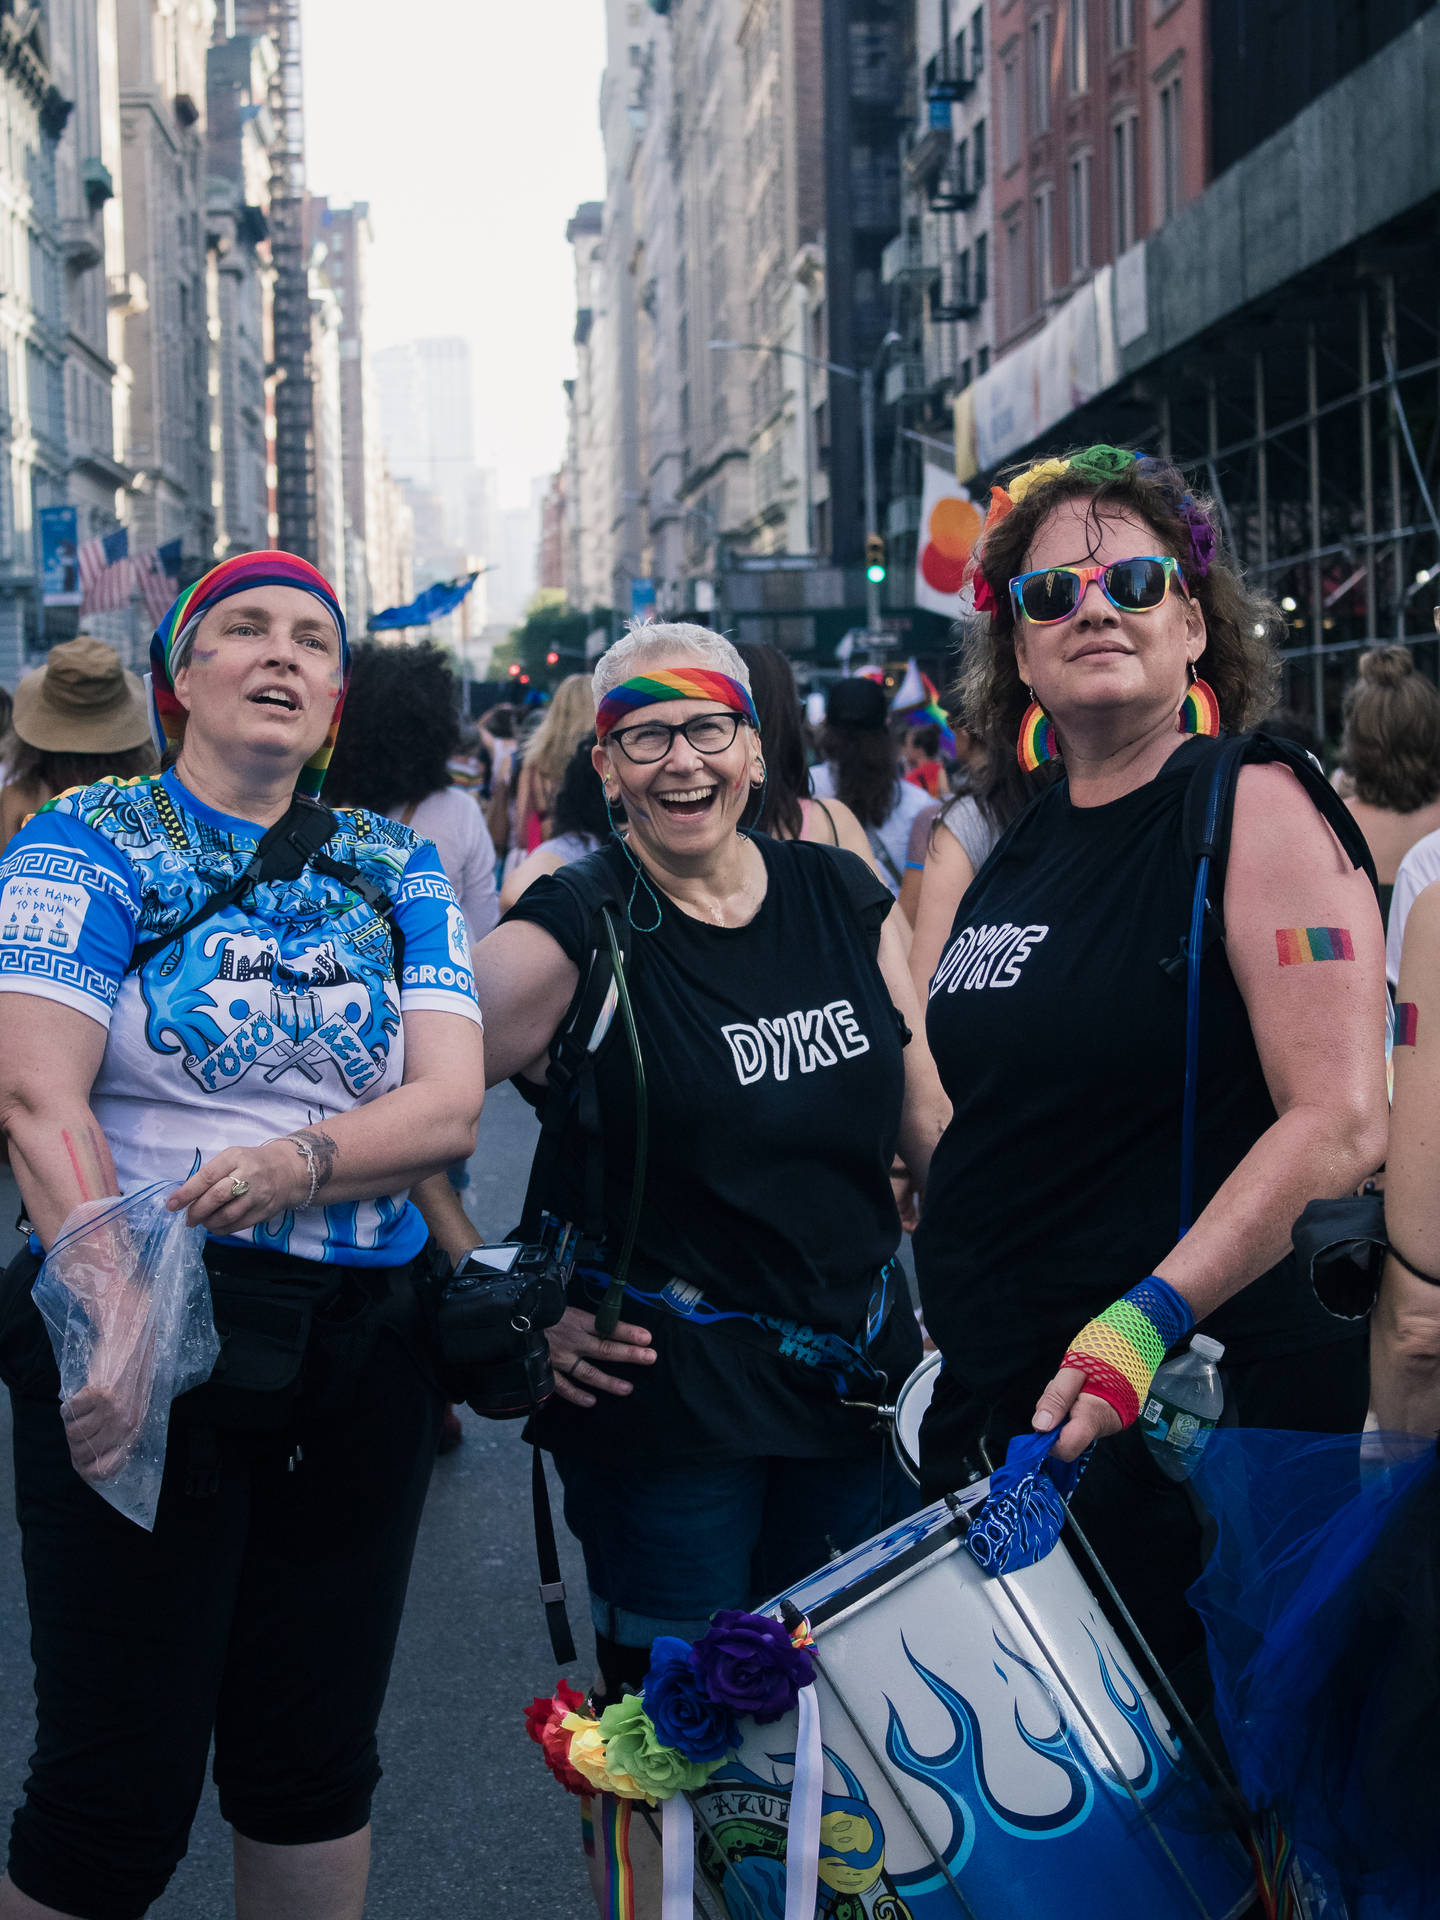 Pride and Unity: Group of Lesbian Women Marching on the Street Wallpaper